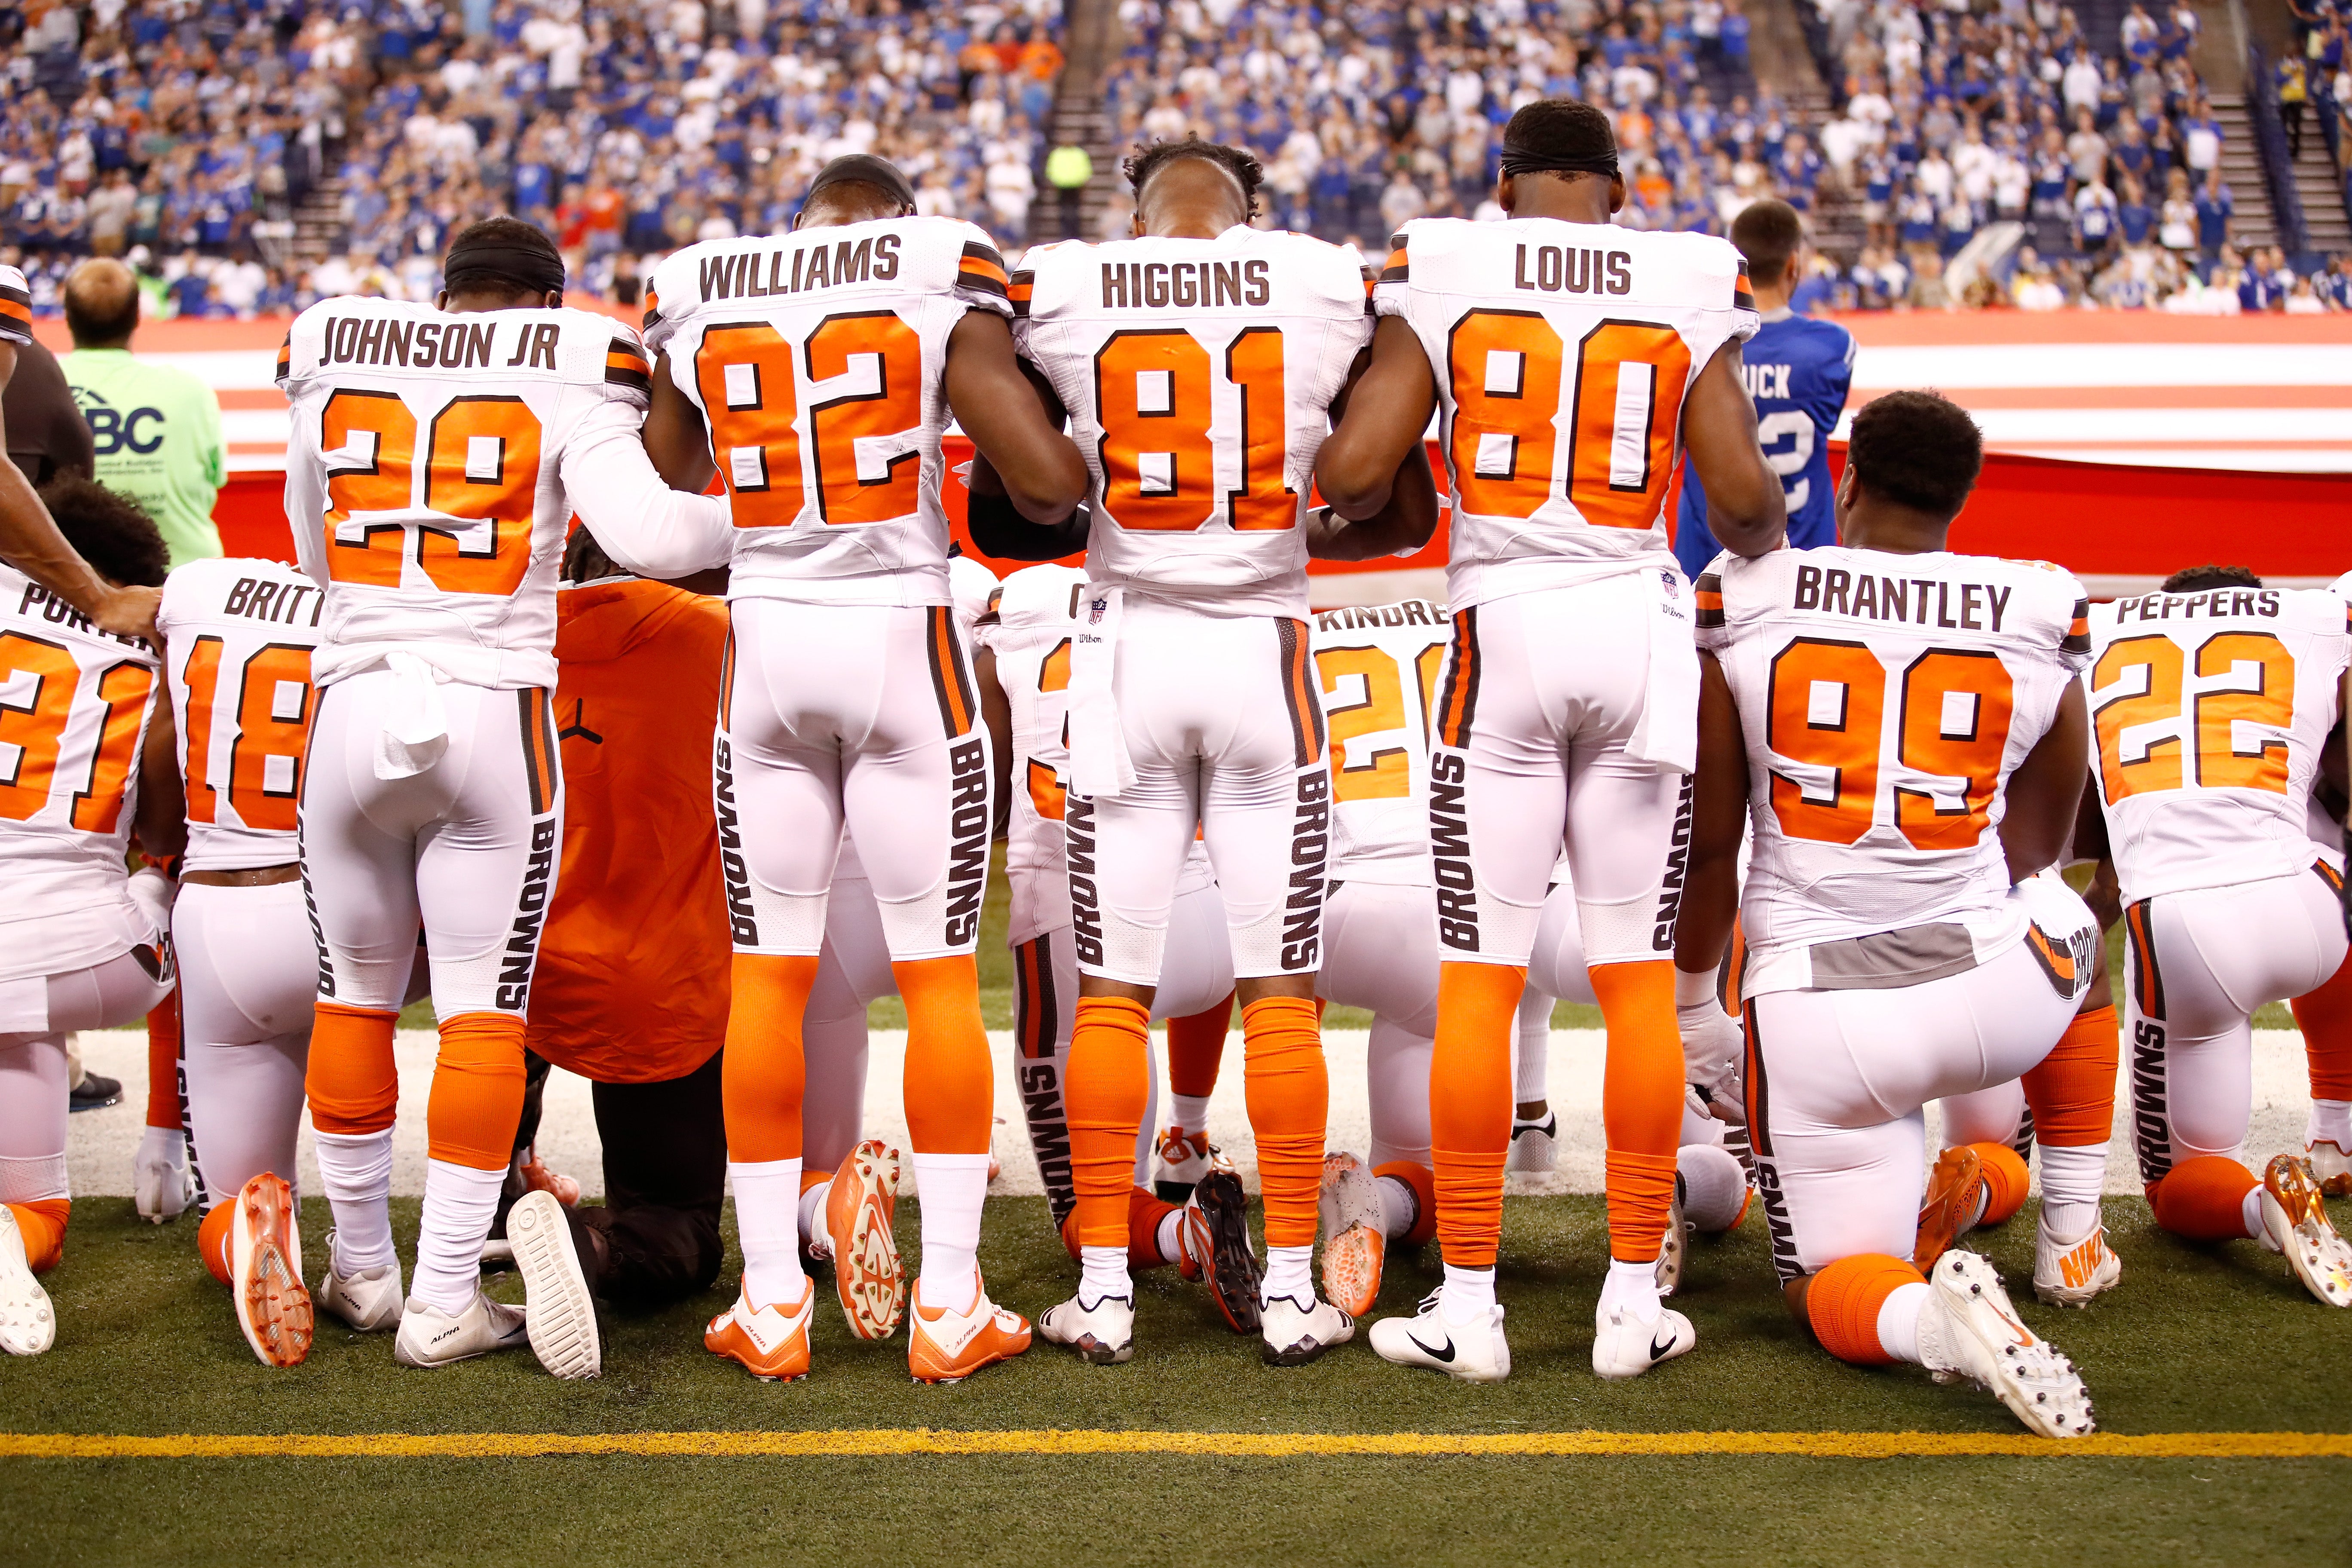 #TakeAKnee: Celebs And NFL Stars React To Trump's Latest Criticism Of National Anthem Protests
